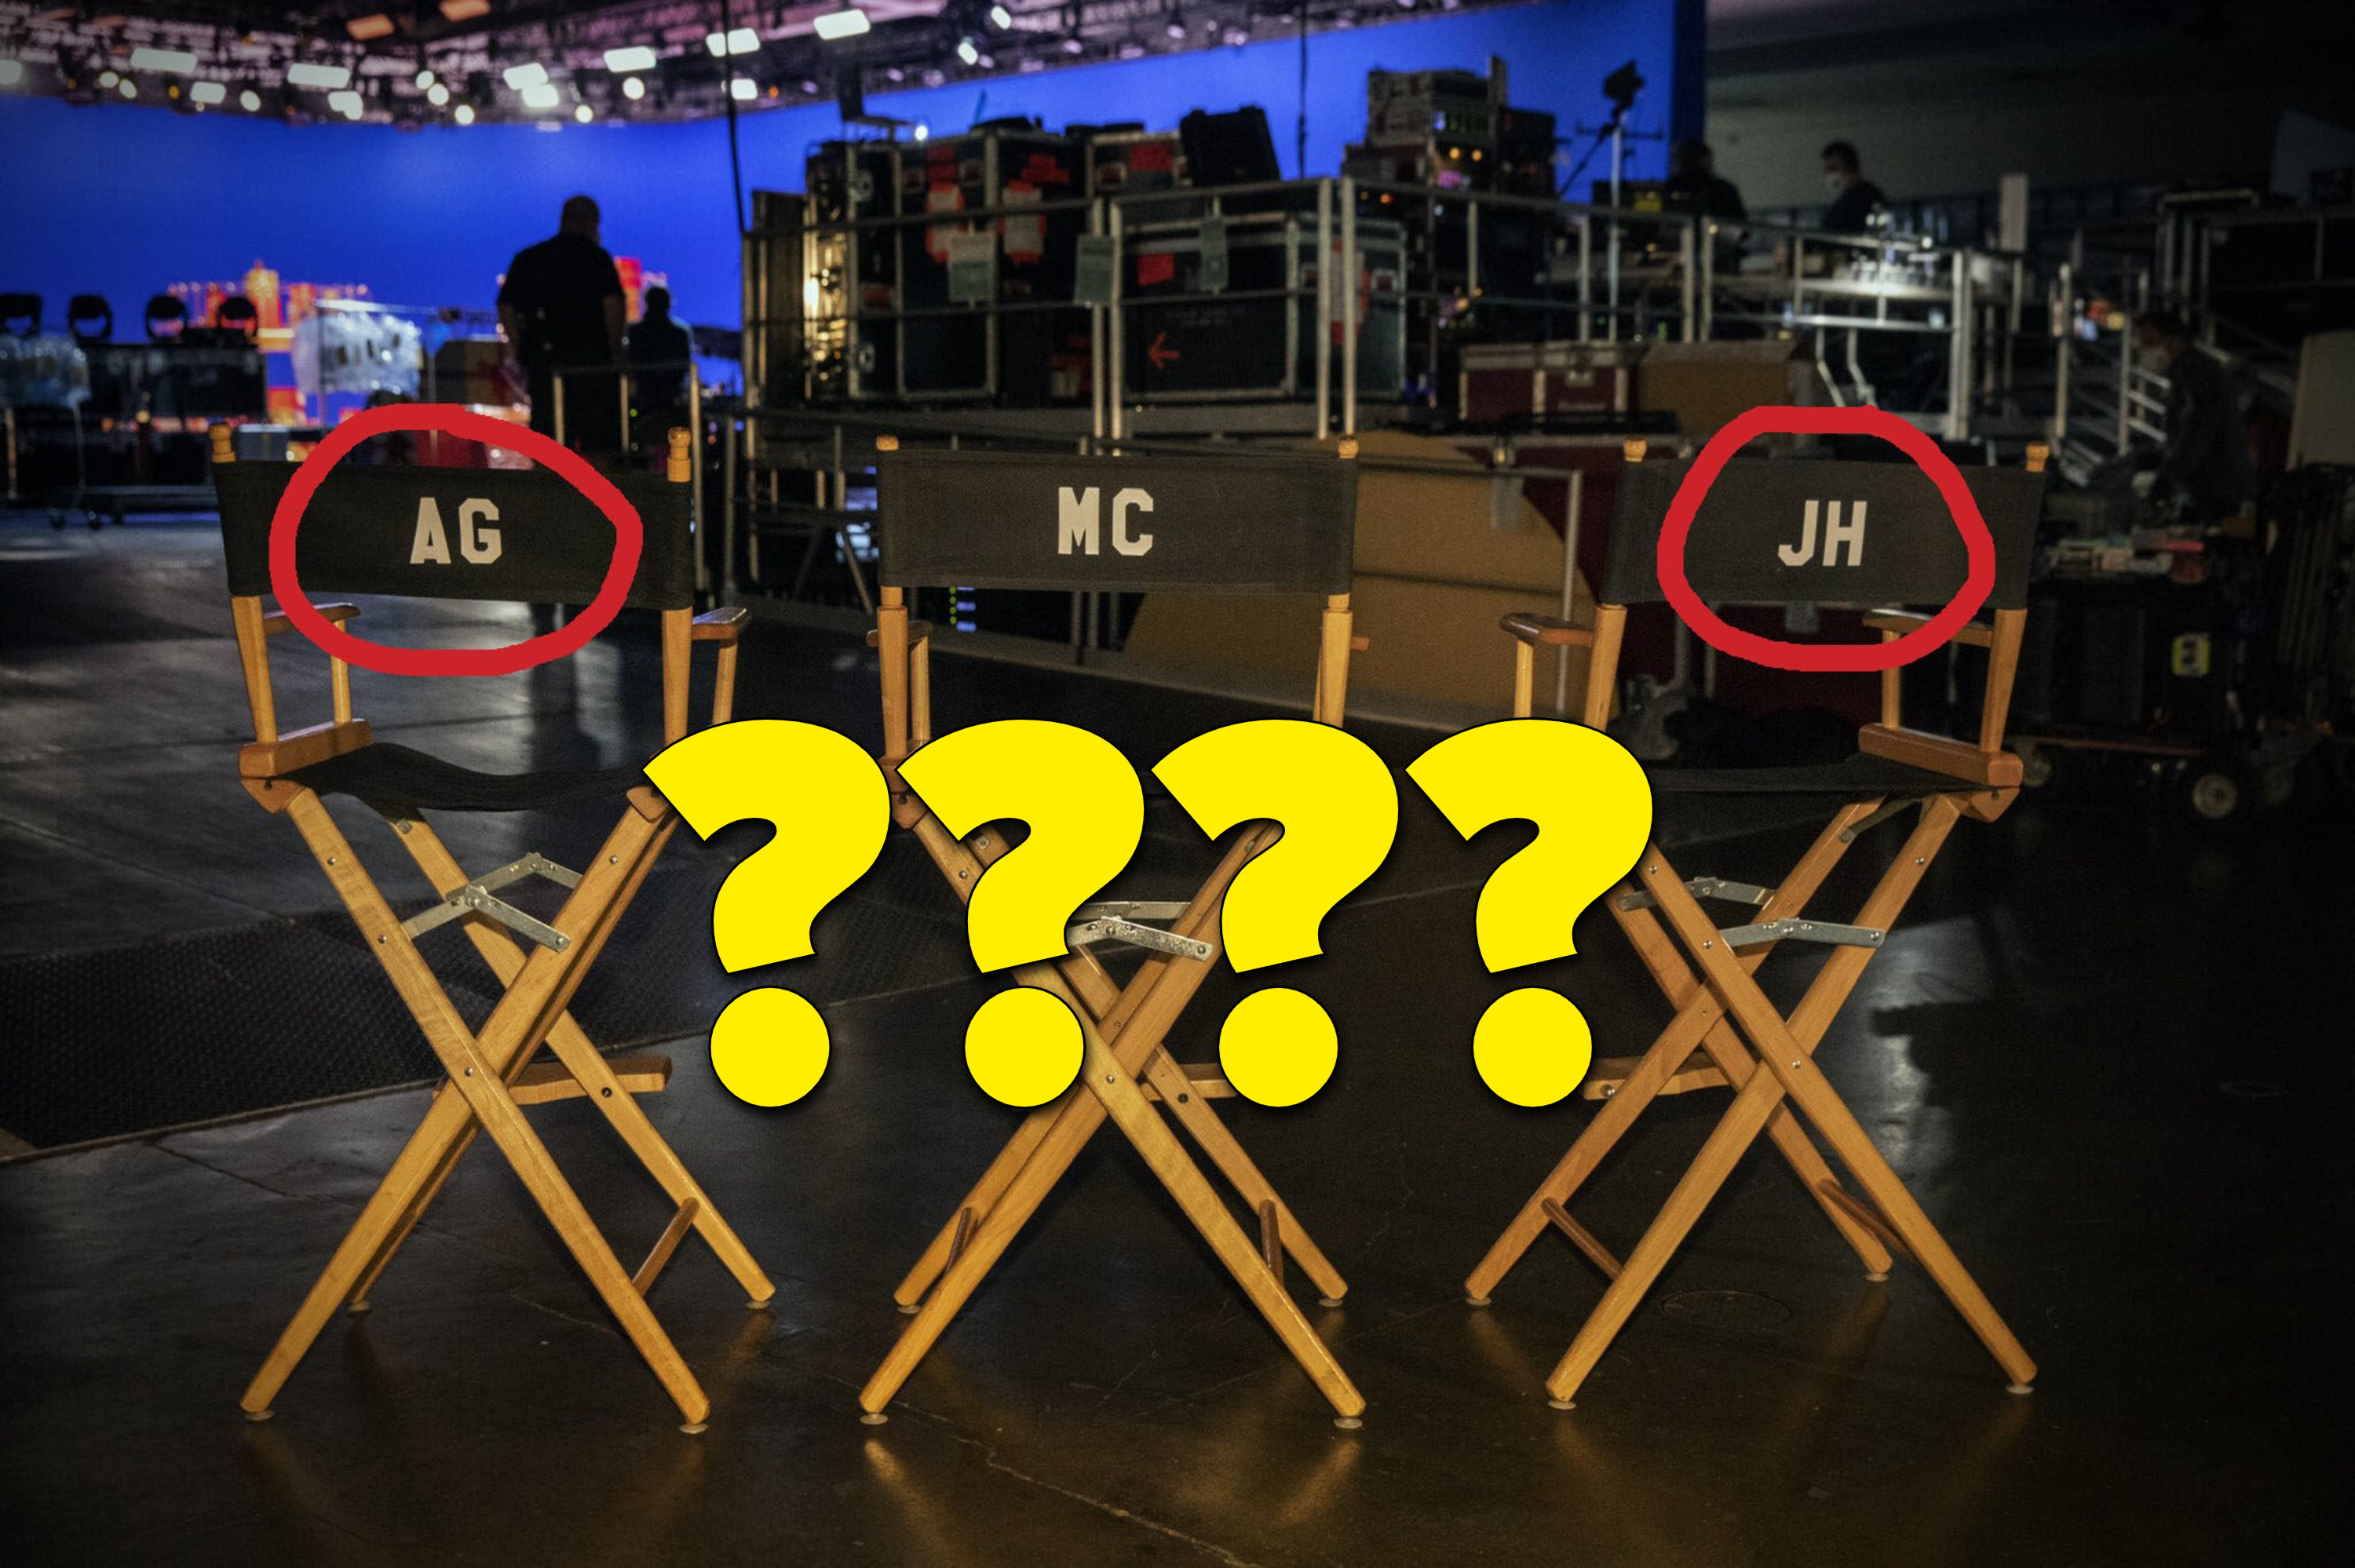 The director chairs with &quot;AG&quot; and &quot;JH&quot; circled for emphasis and large question marks to add to the mystery